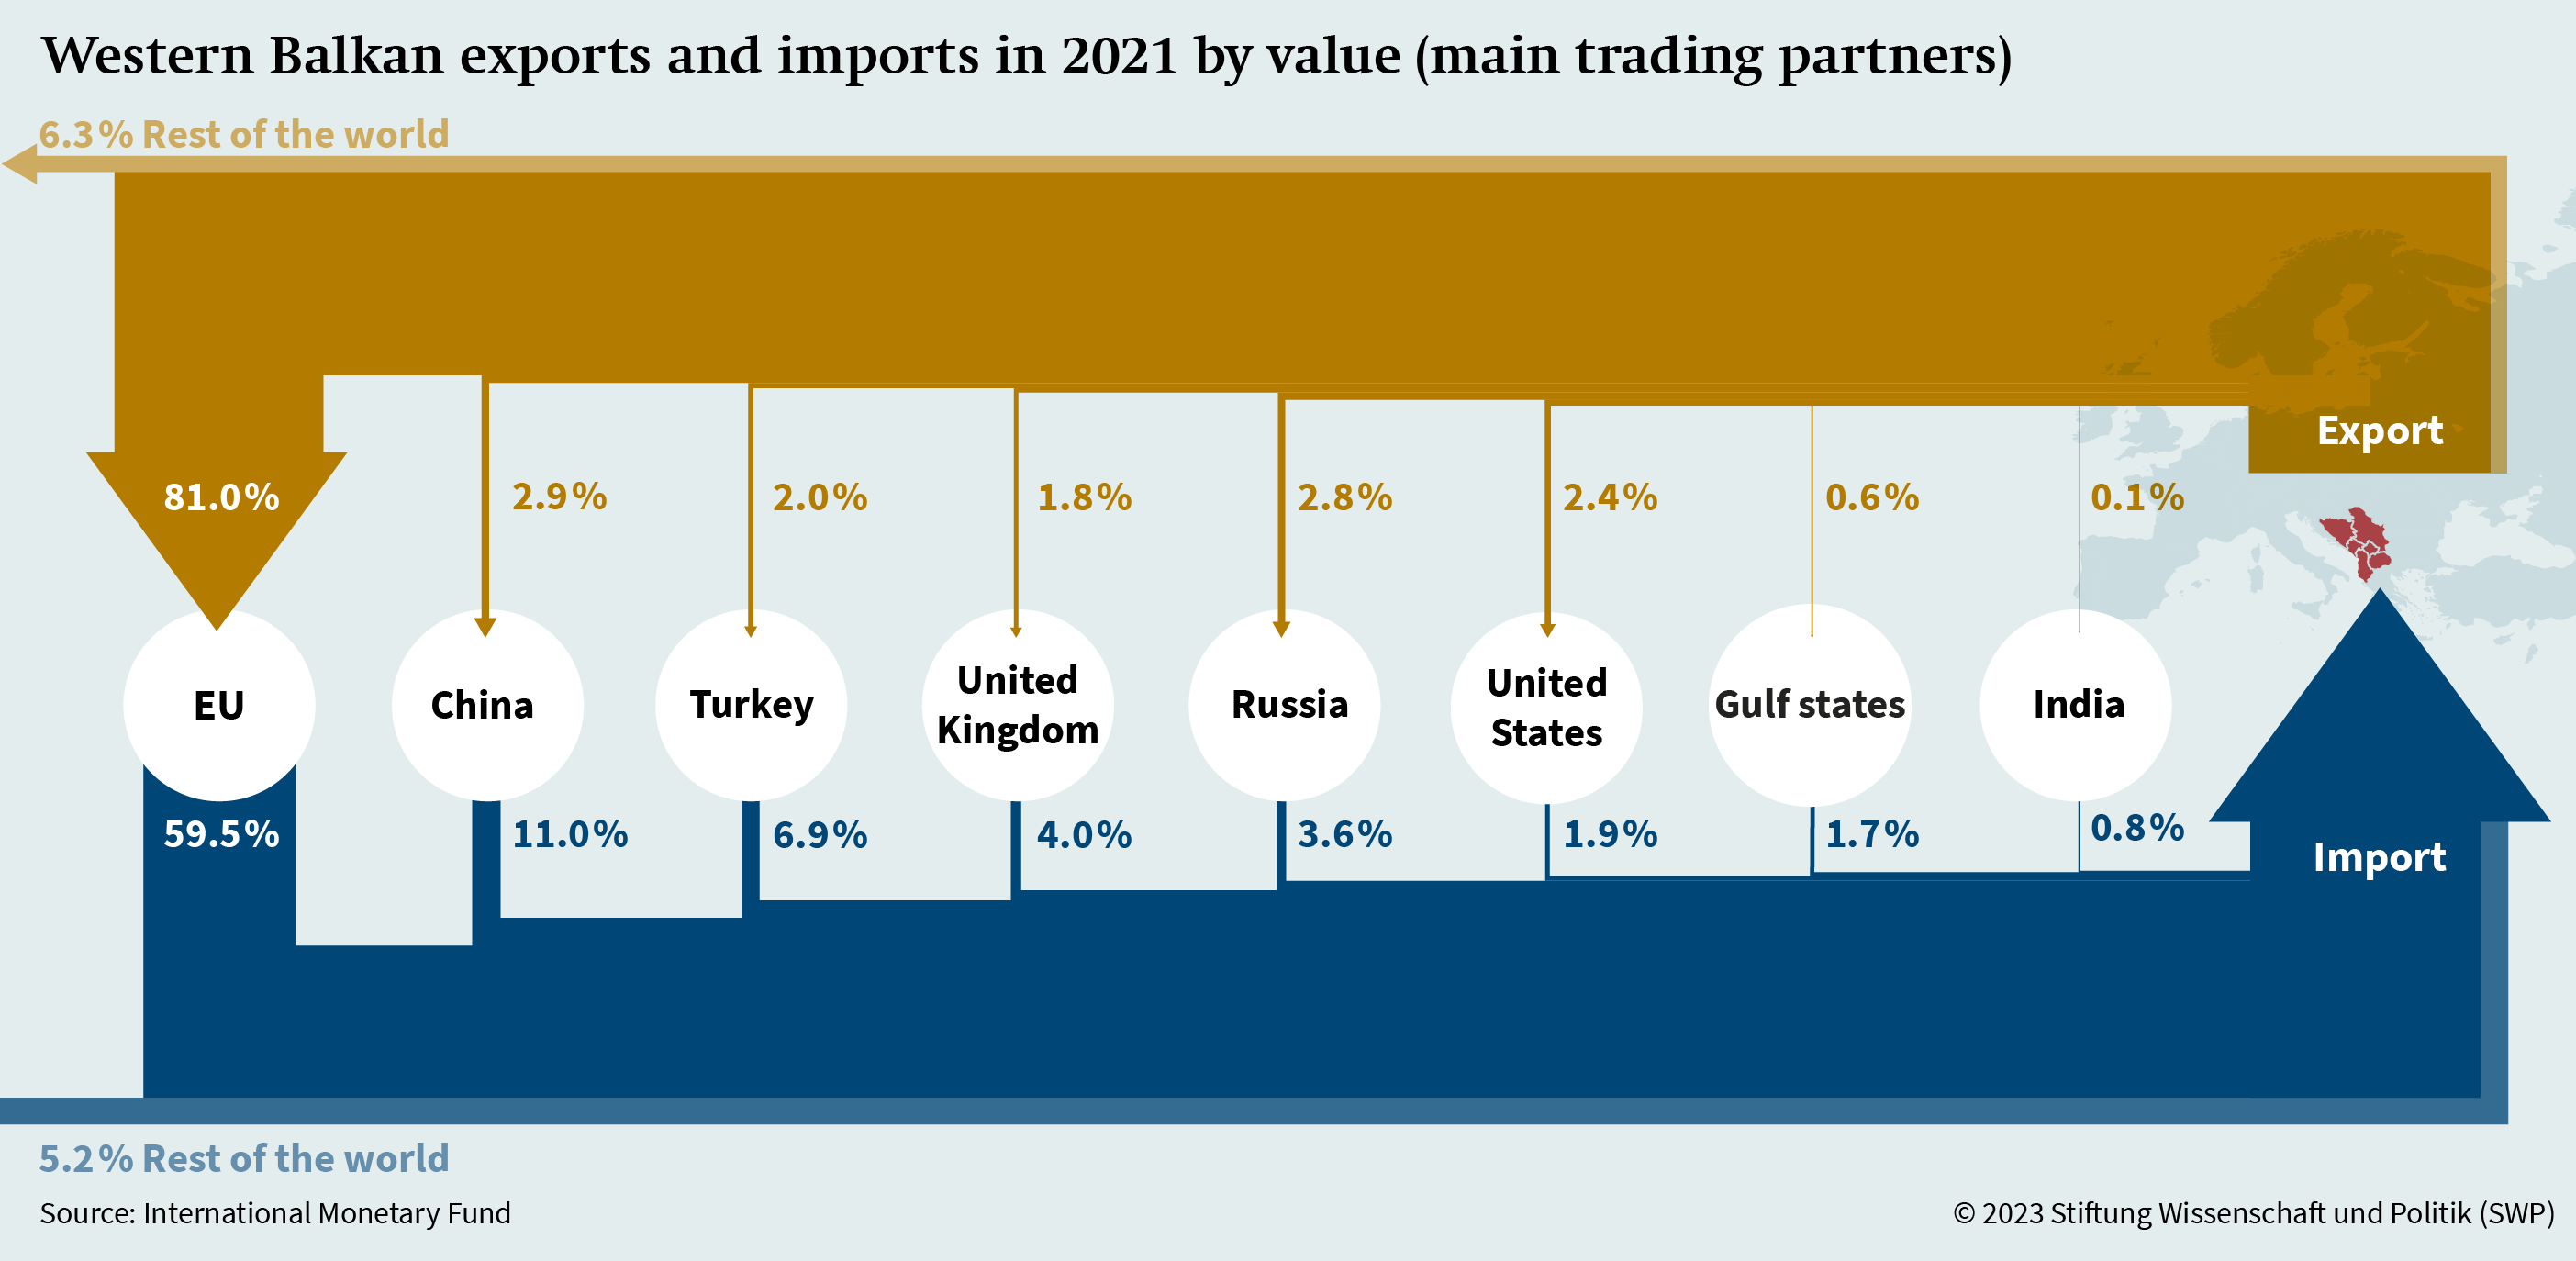 Figure 1: Western Balkan exports and imports in 2021 by value (main trading partners)